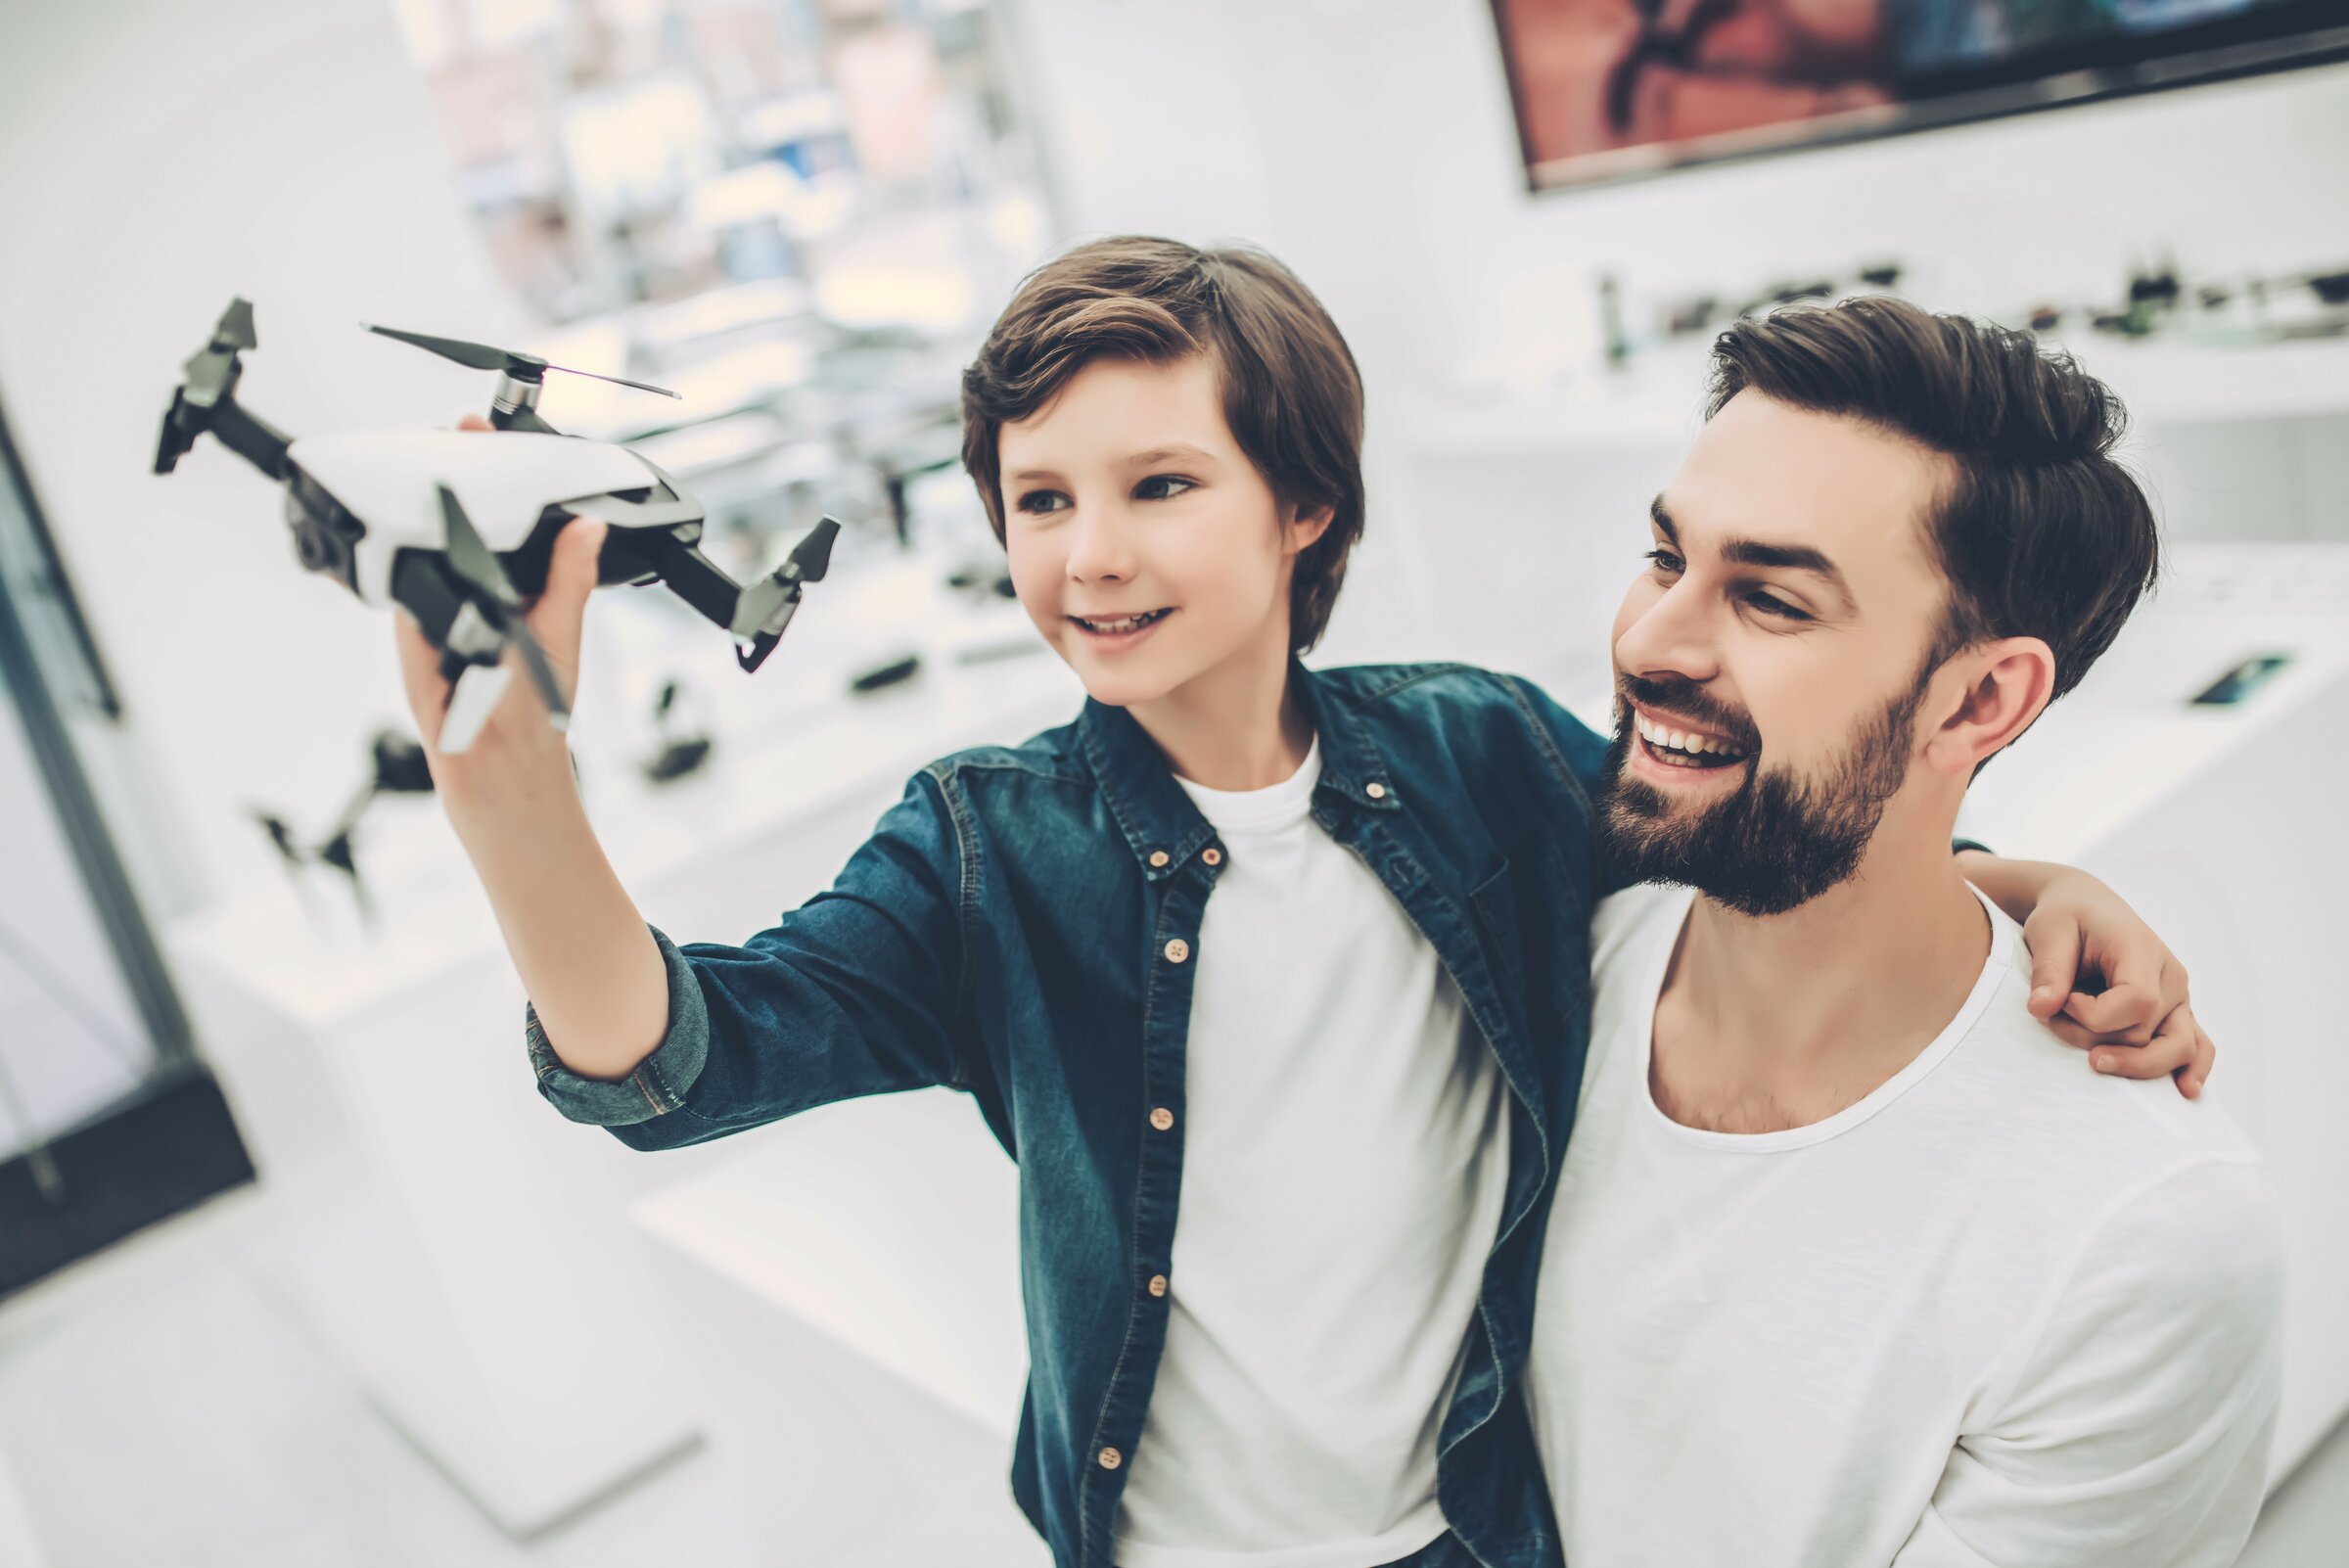 Advantages of private drone insurance with DMO